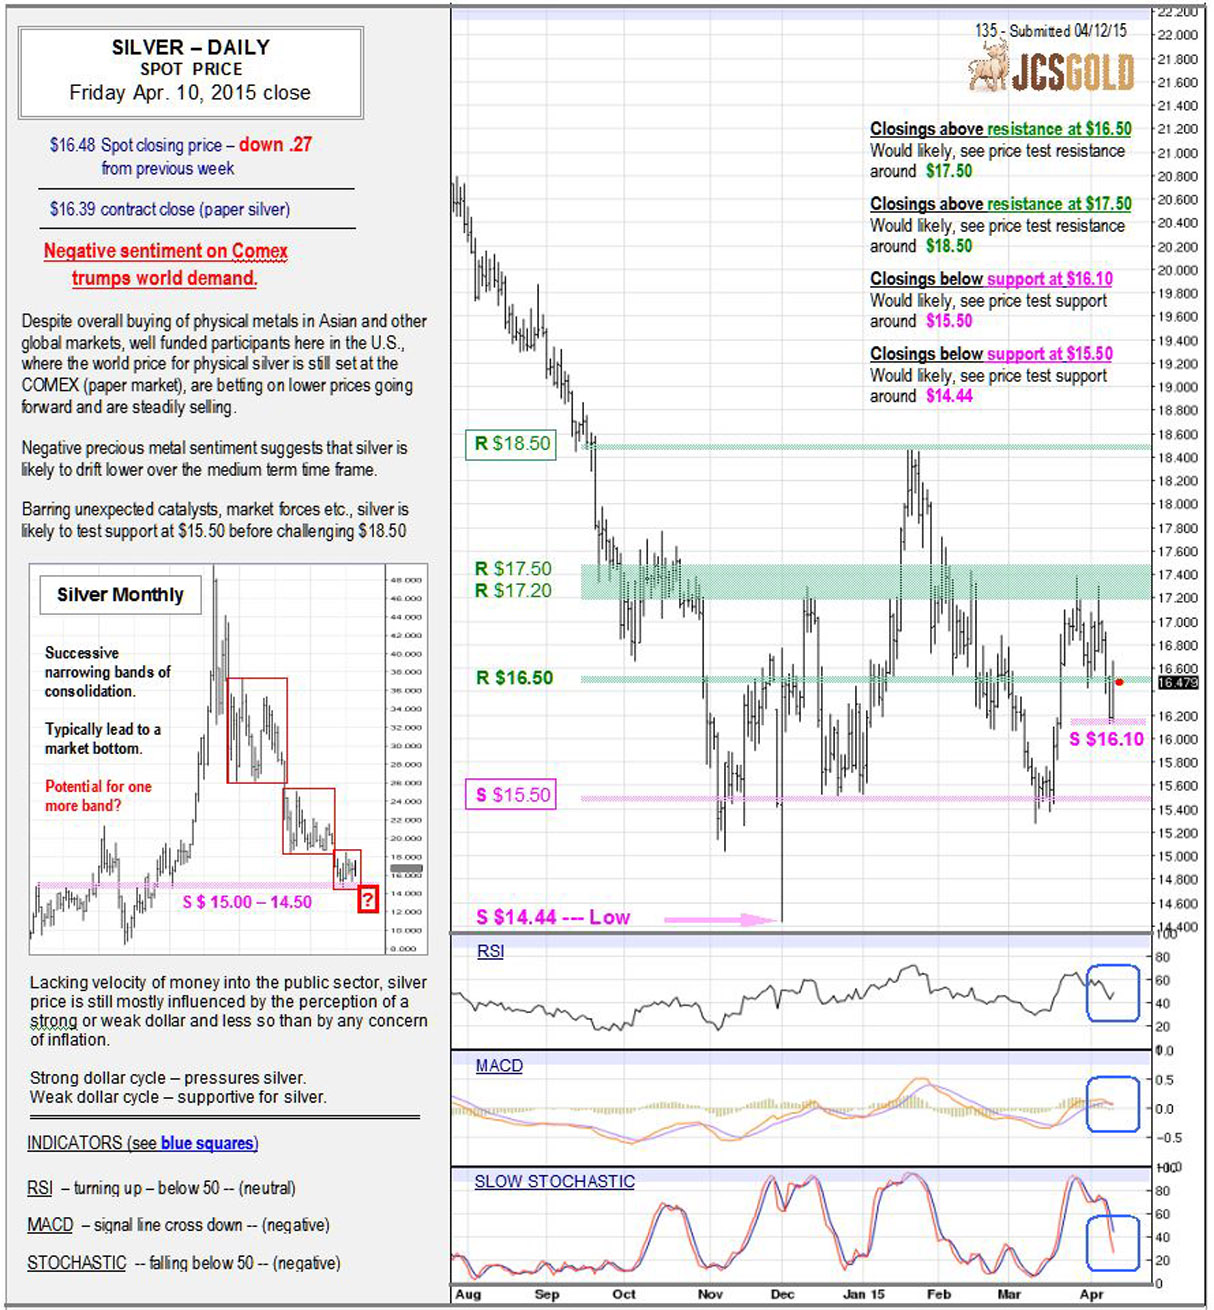 Apr 10, 2015 chart & commentary